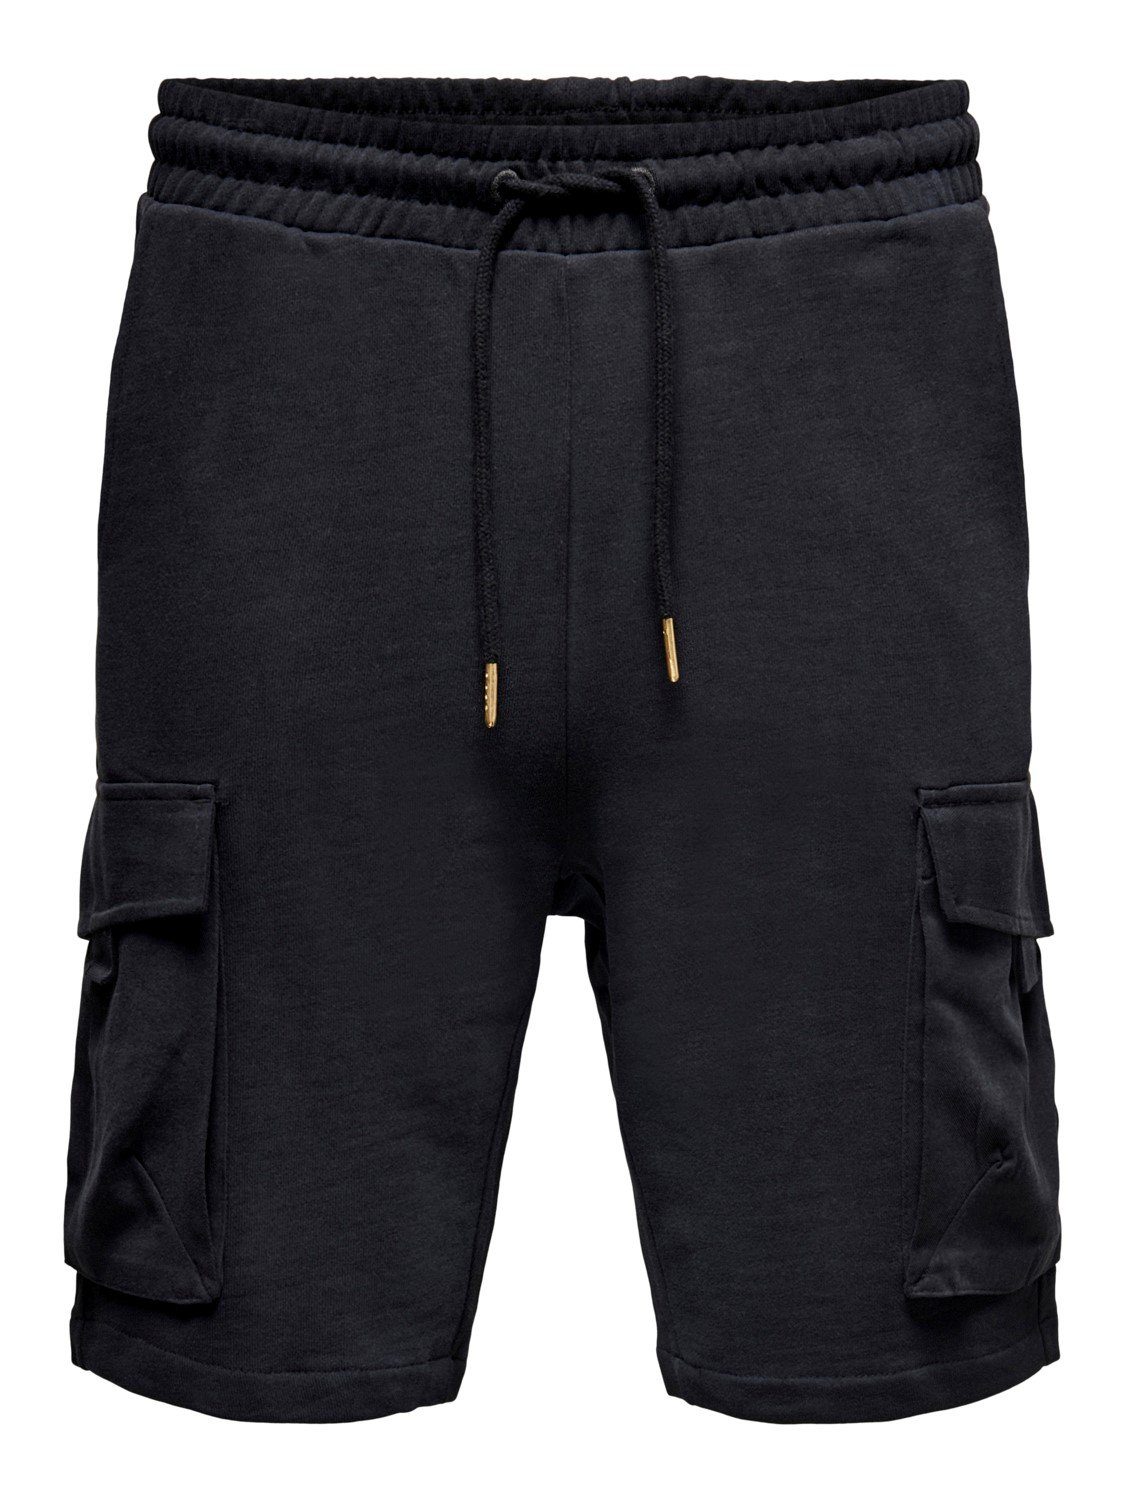 ONLY & SONS Shorts ONSNICKY aus Baumwolle Black 22019126